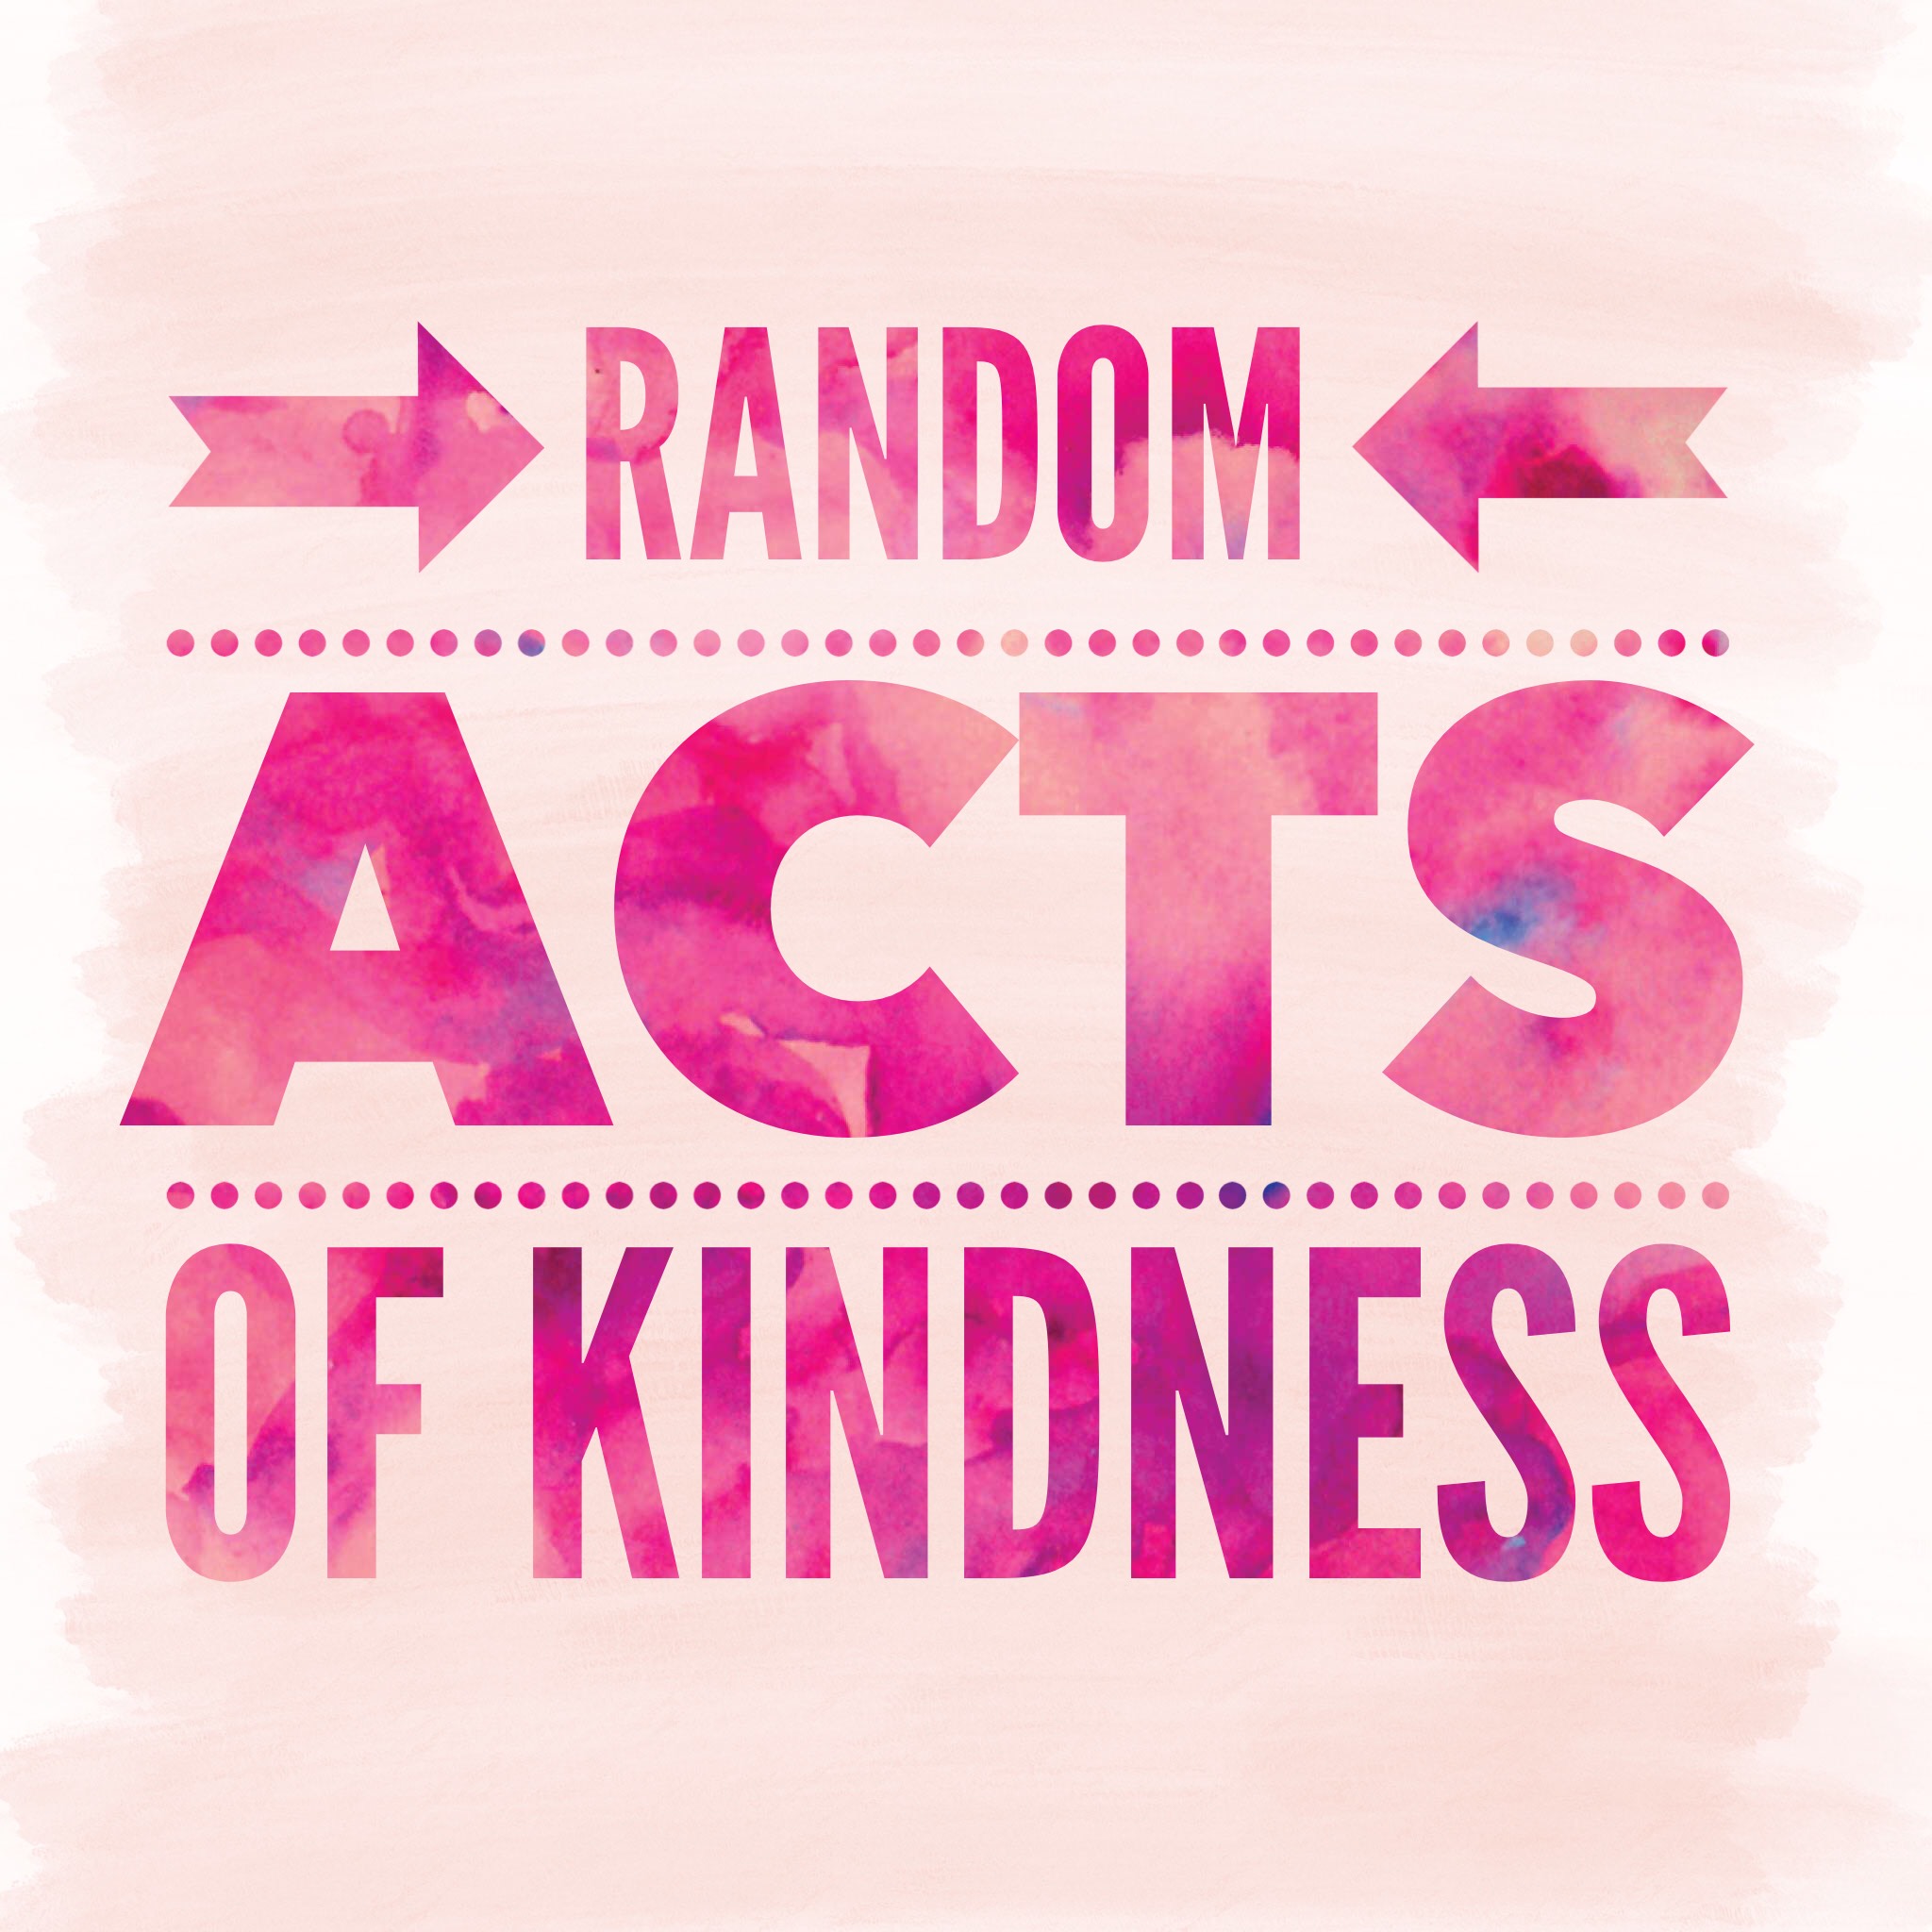 Random Acts of Kindness: Crafting Kindness!